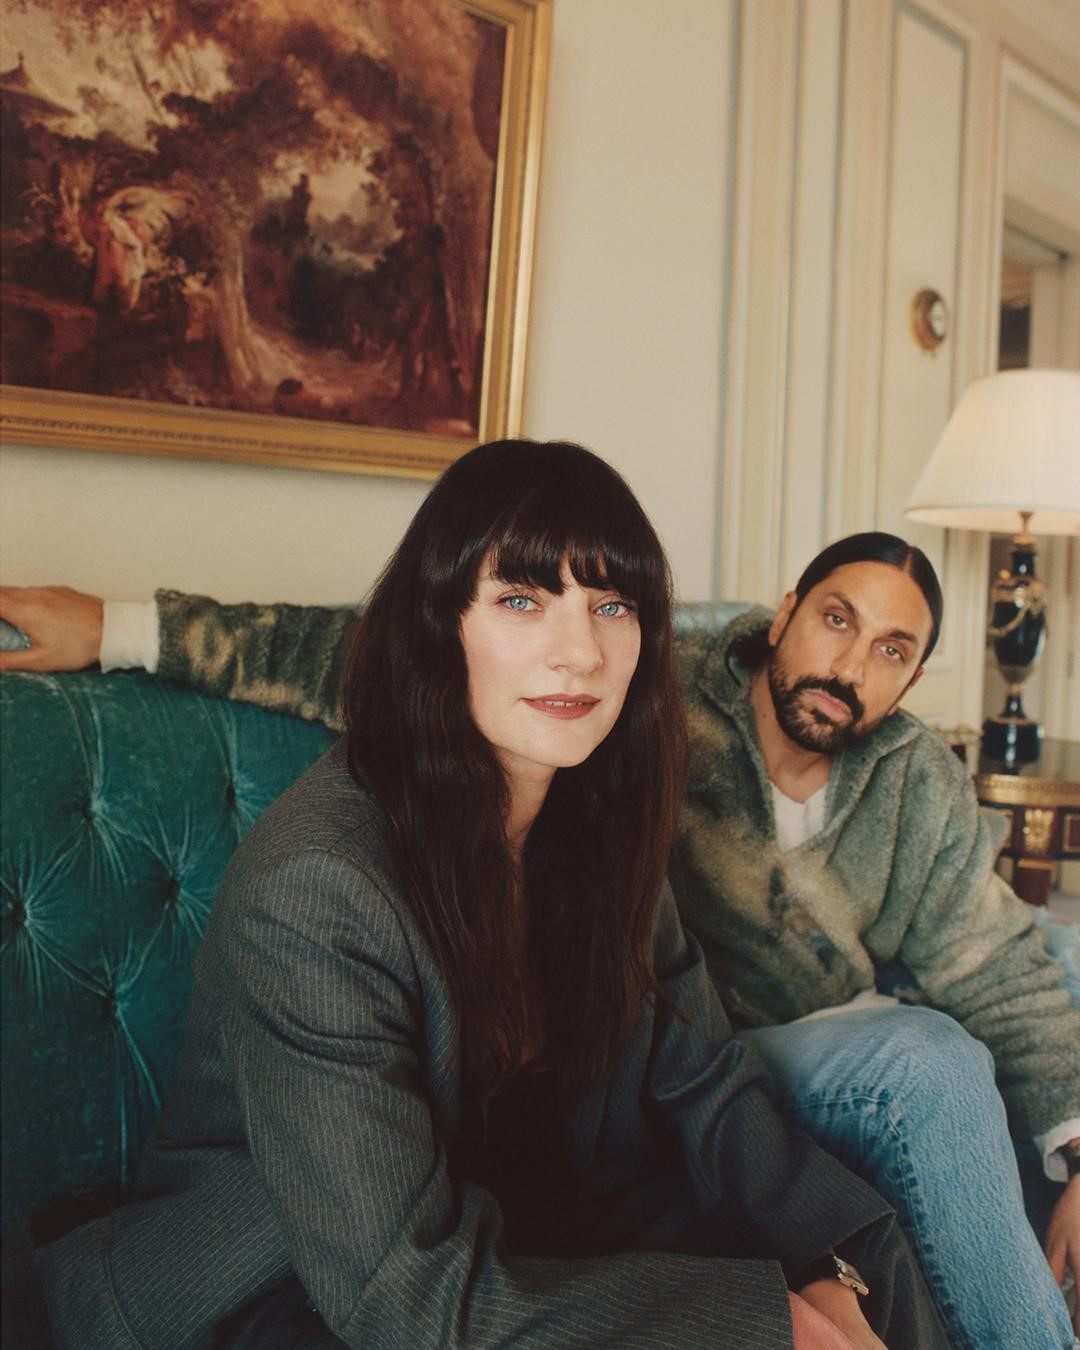 Byredo founder Ben Gorham (right) talks about working with Lucia Pica (left), his unusual backstory and how he is enjoying experimenting with make-up.